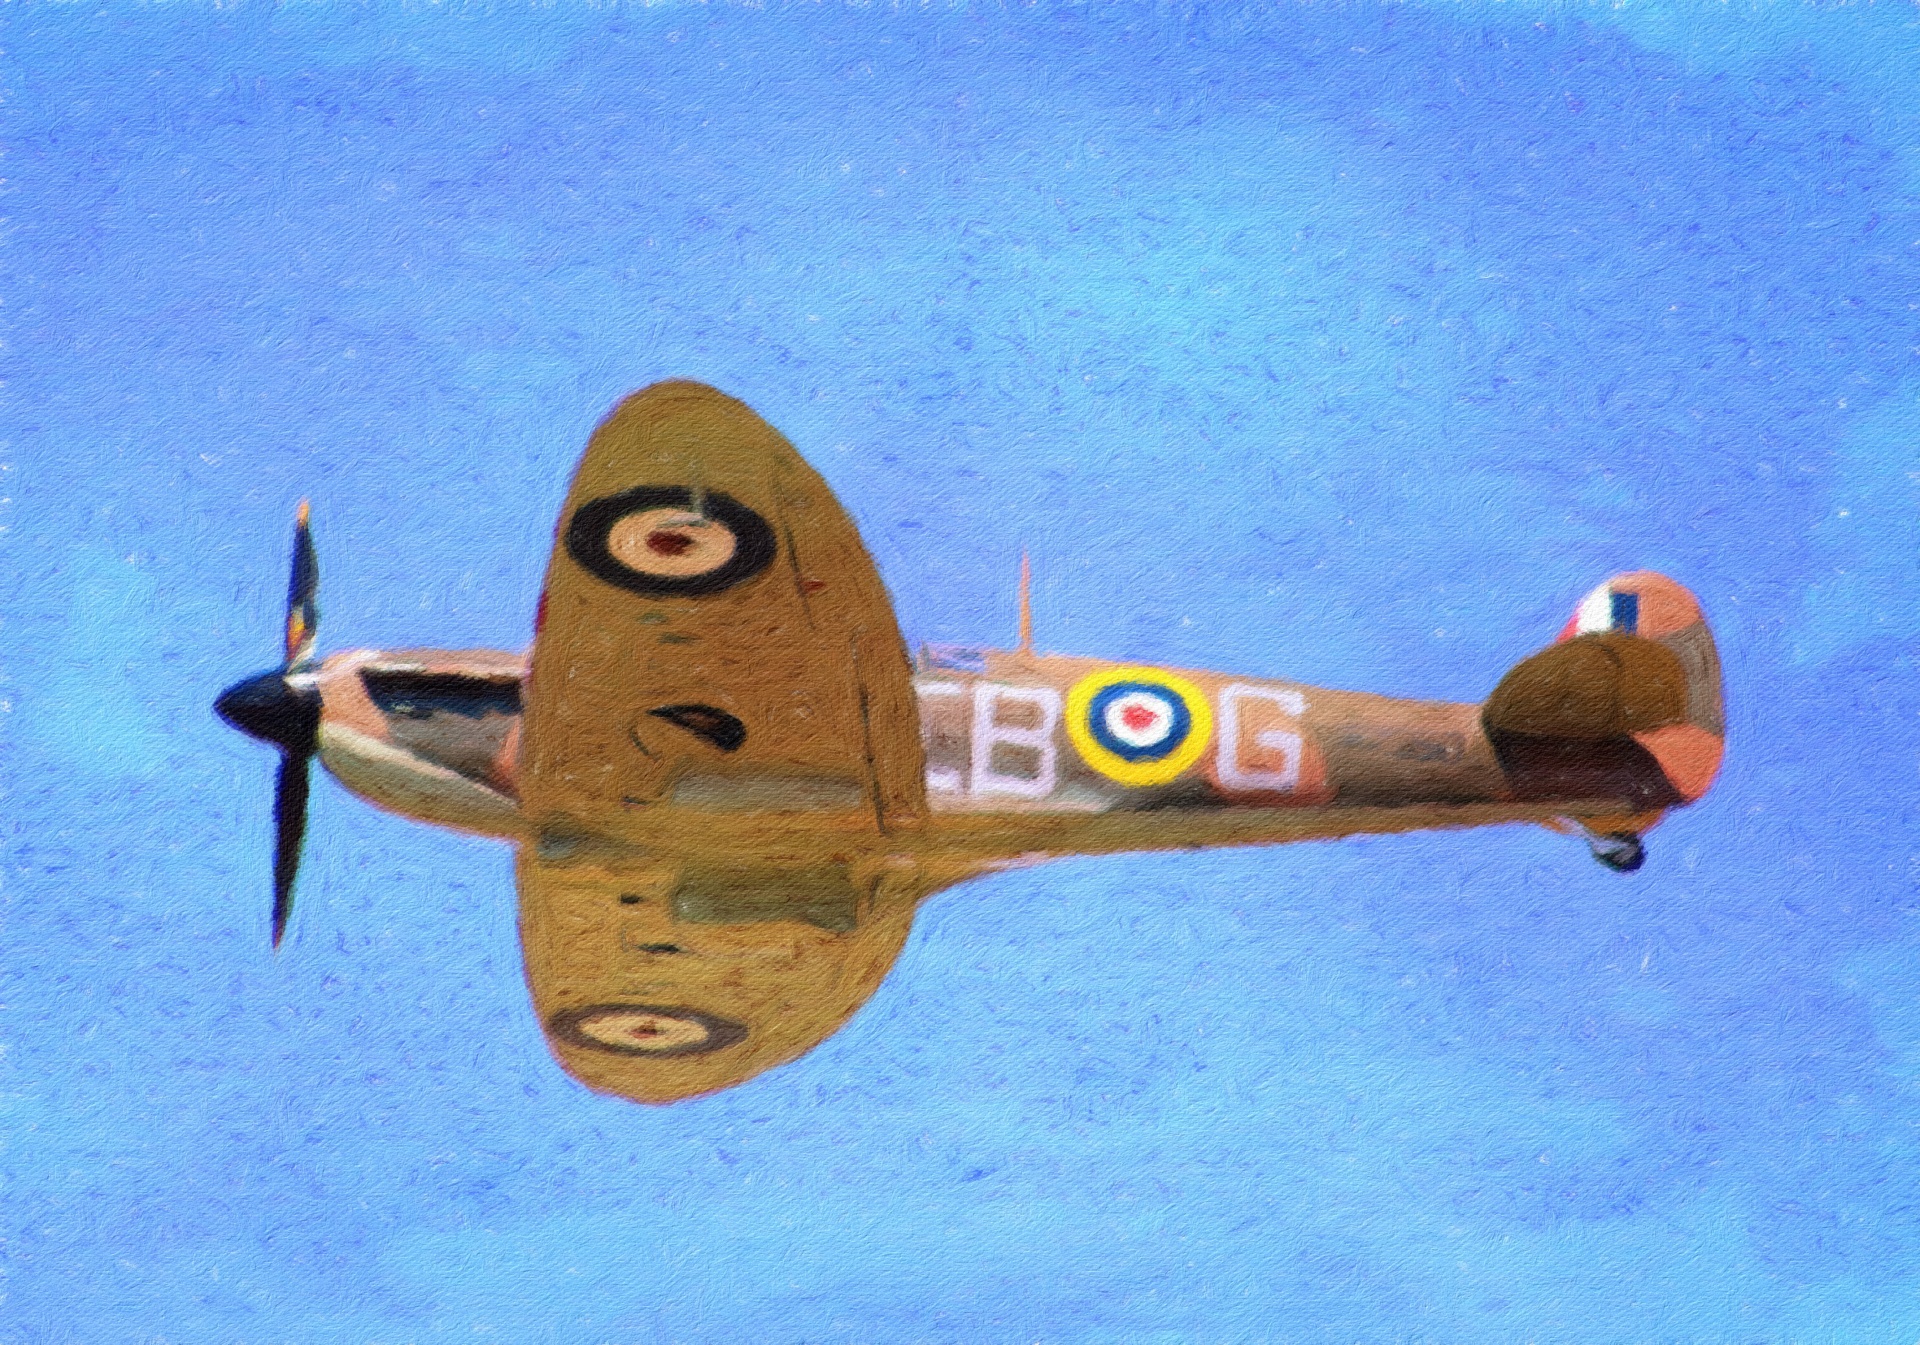 Spitfire WW2 plane, oil painted now a print, spitfire from ww2